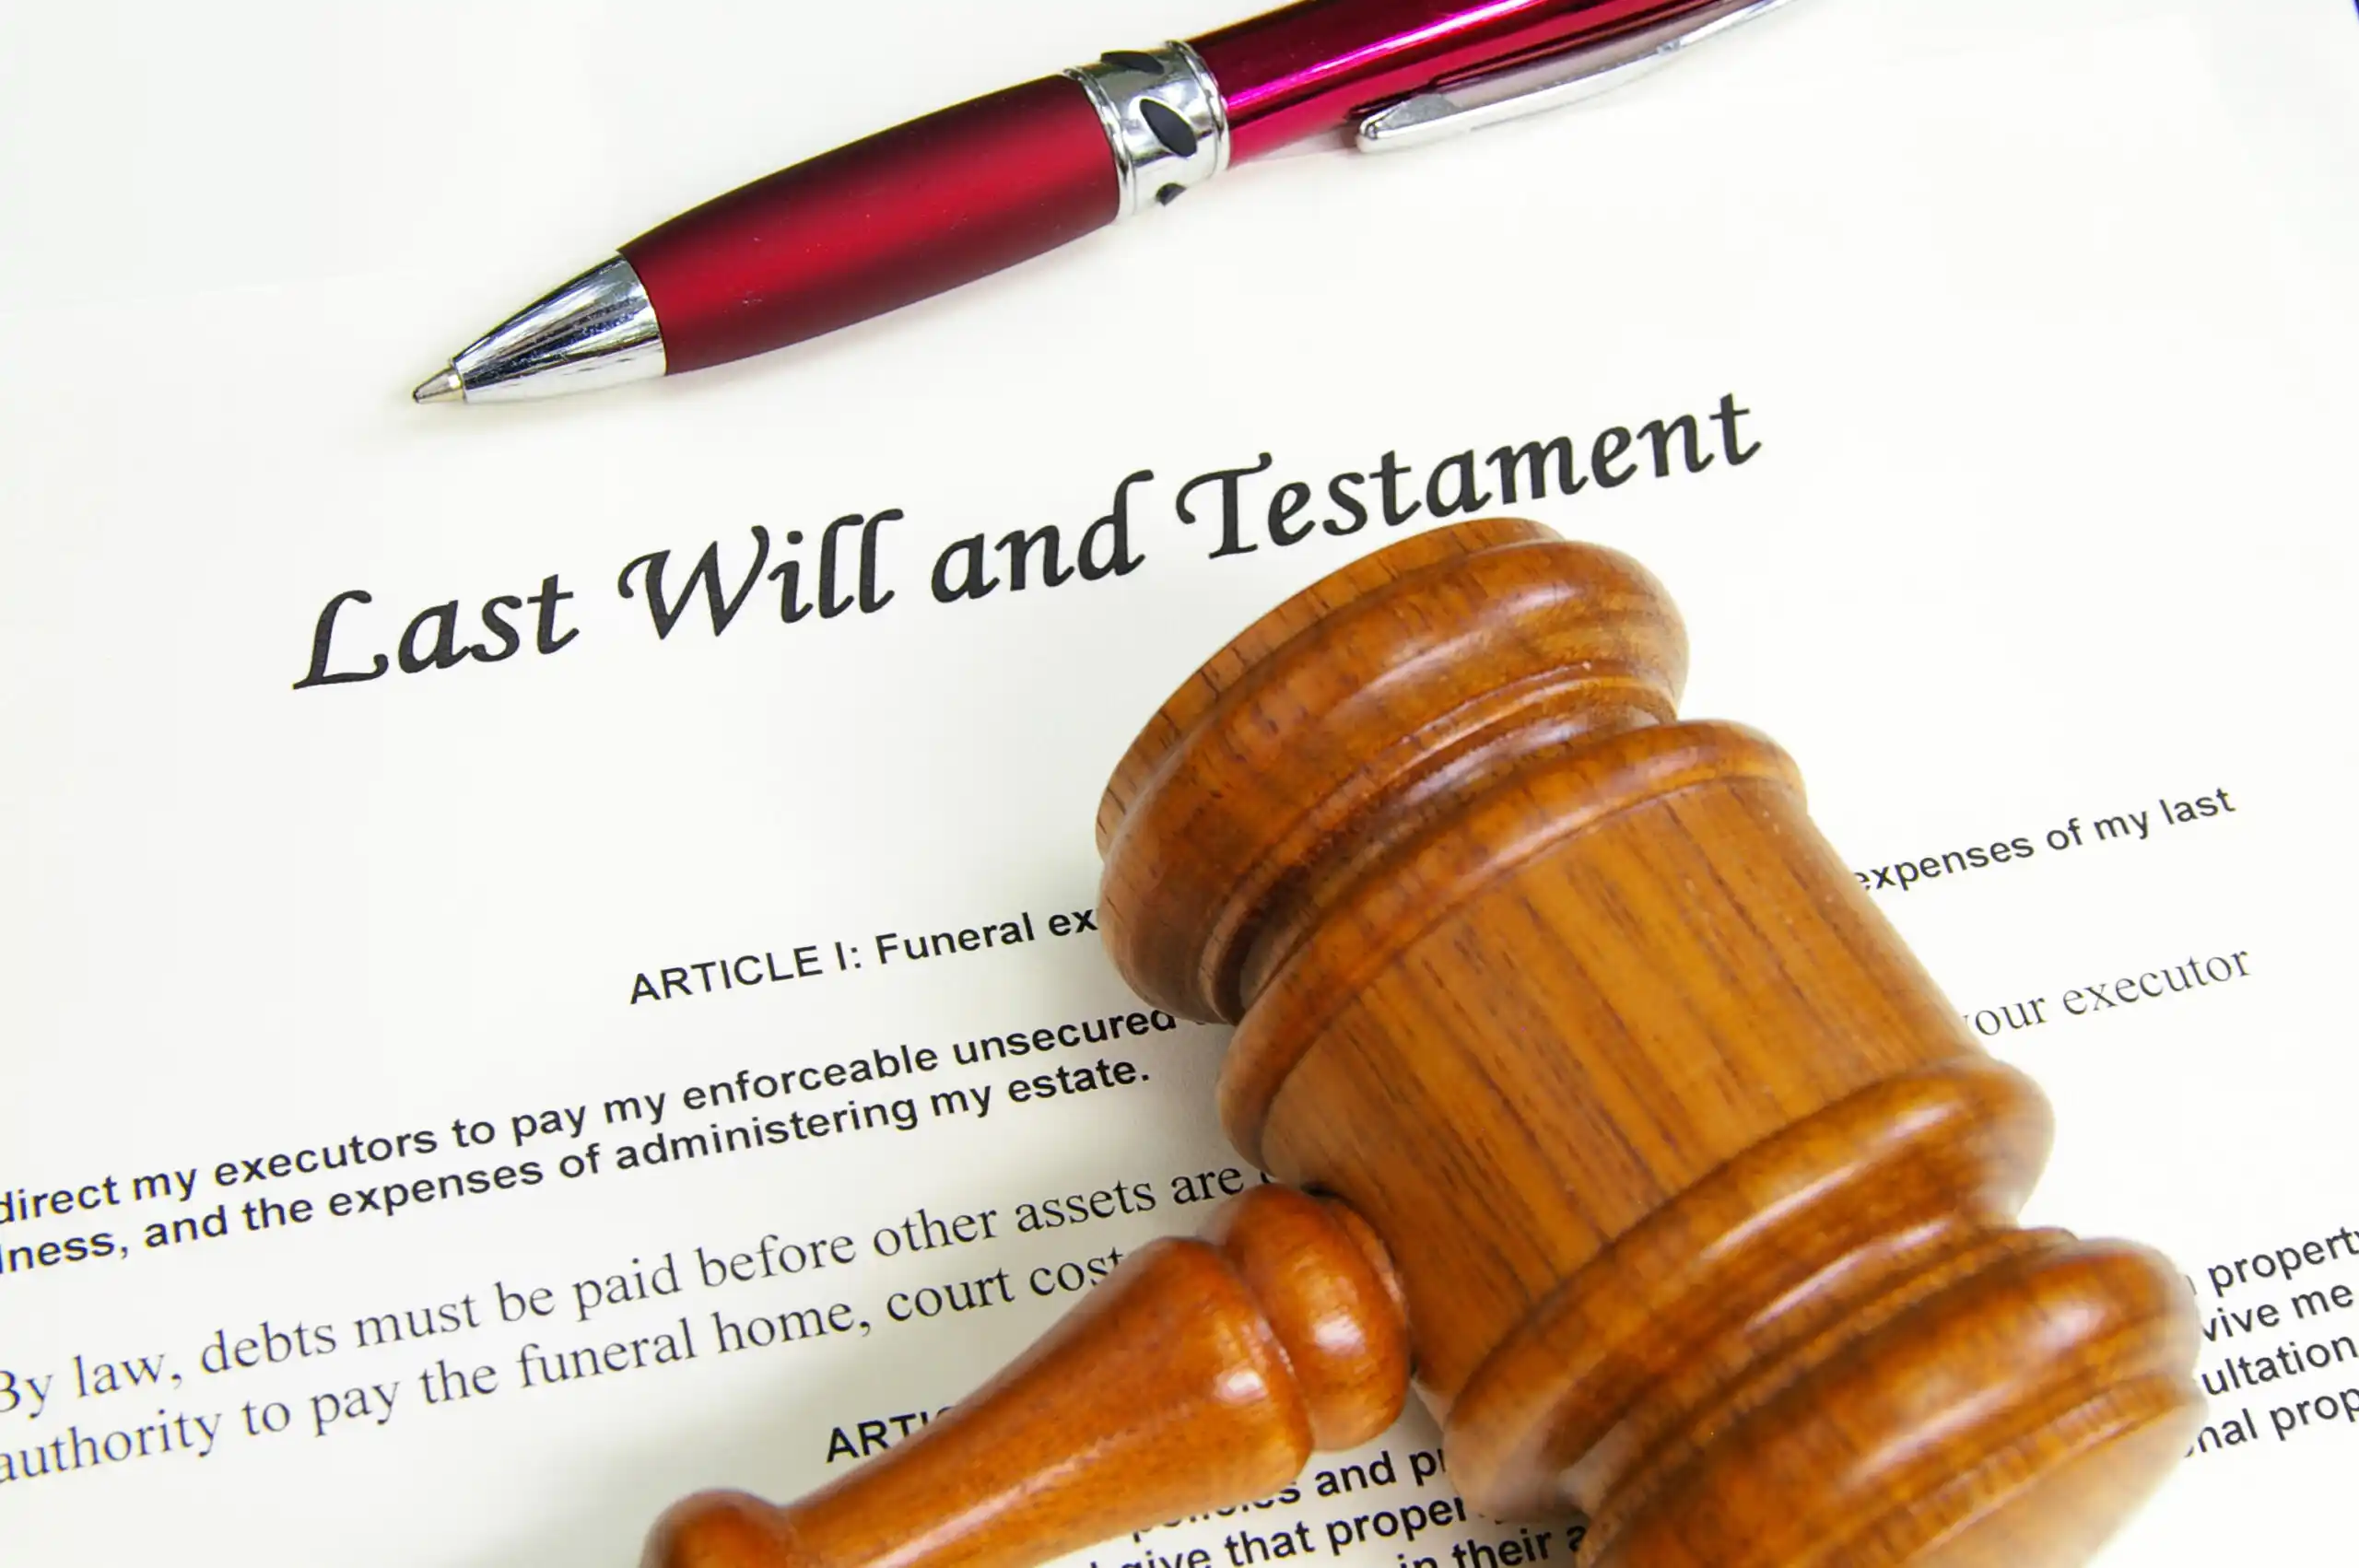 Last will and testament probate court